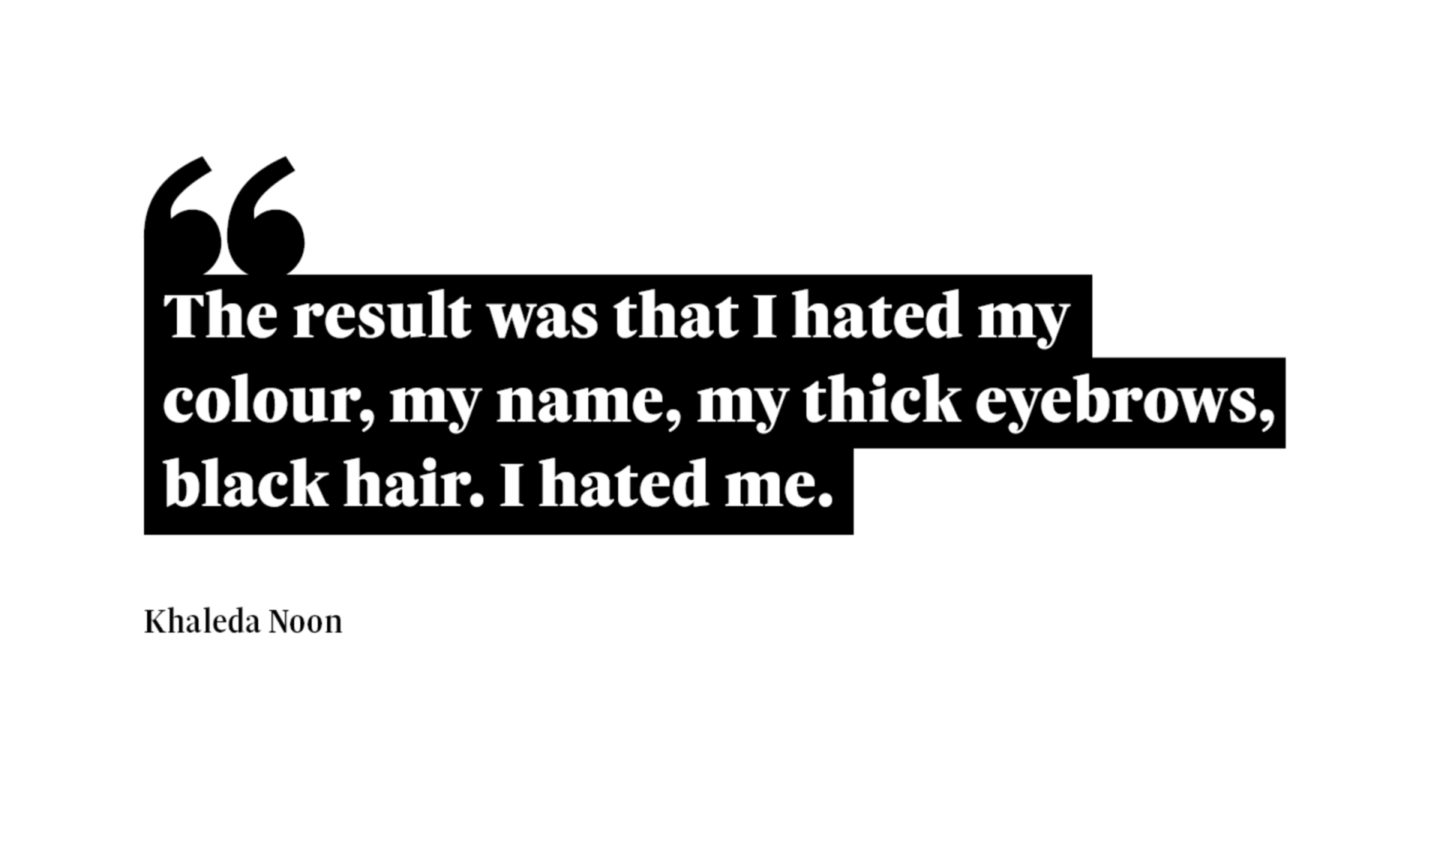 A graphic with the words: “The result was that I hated my colour, my name, my thick eyebrows, black hair. I hated me.”